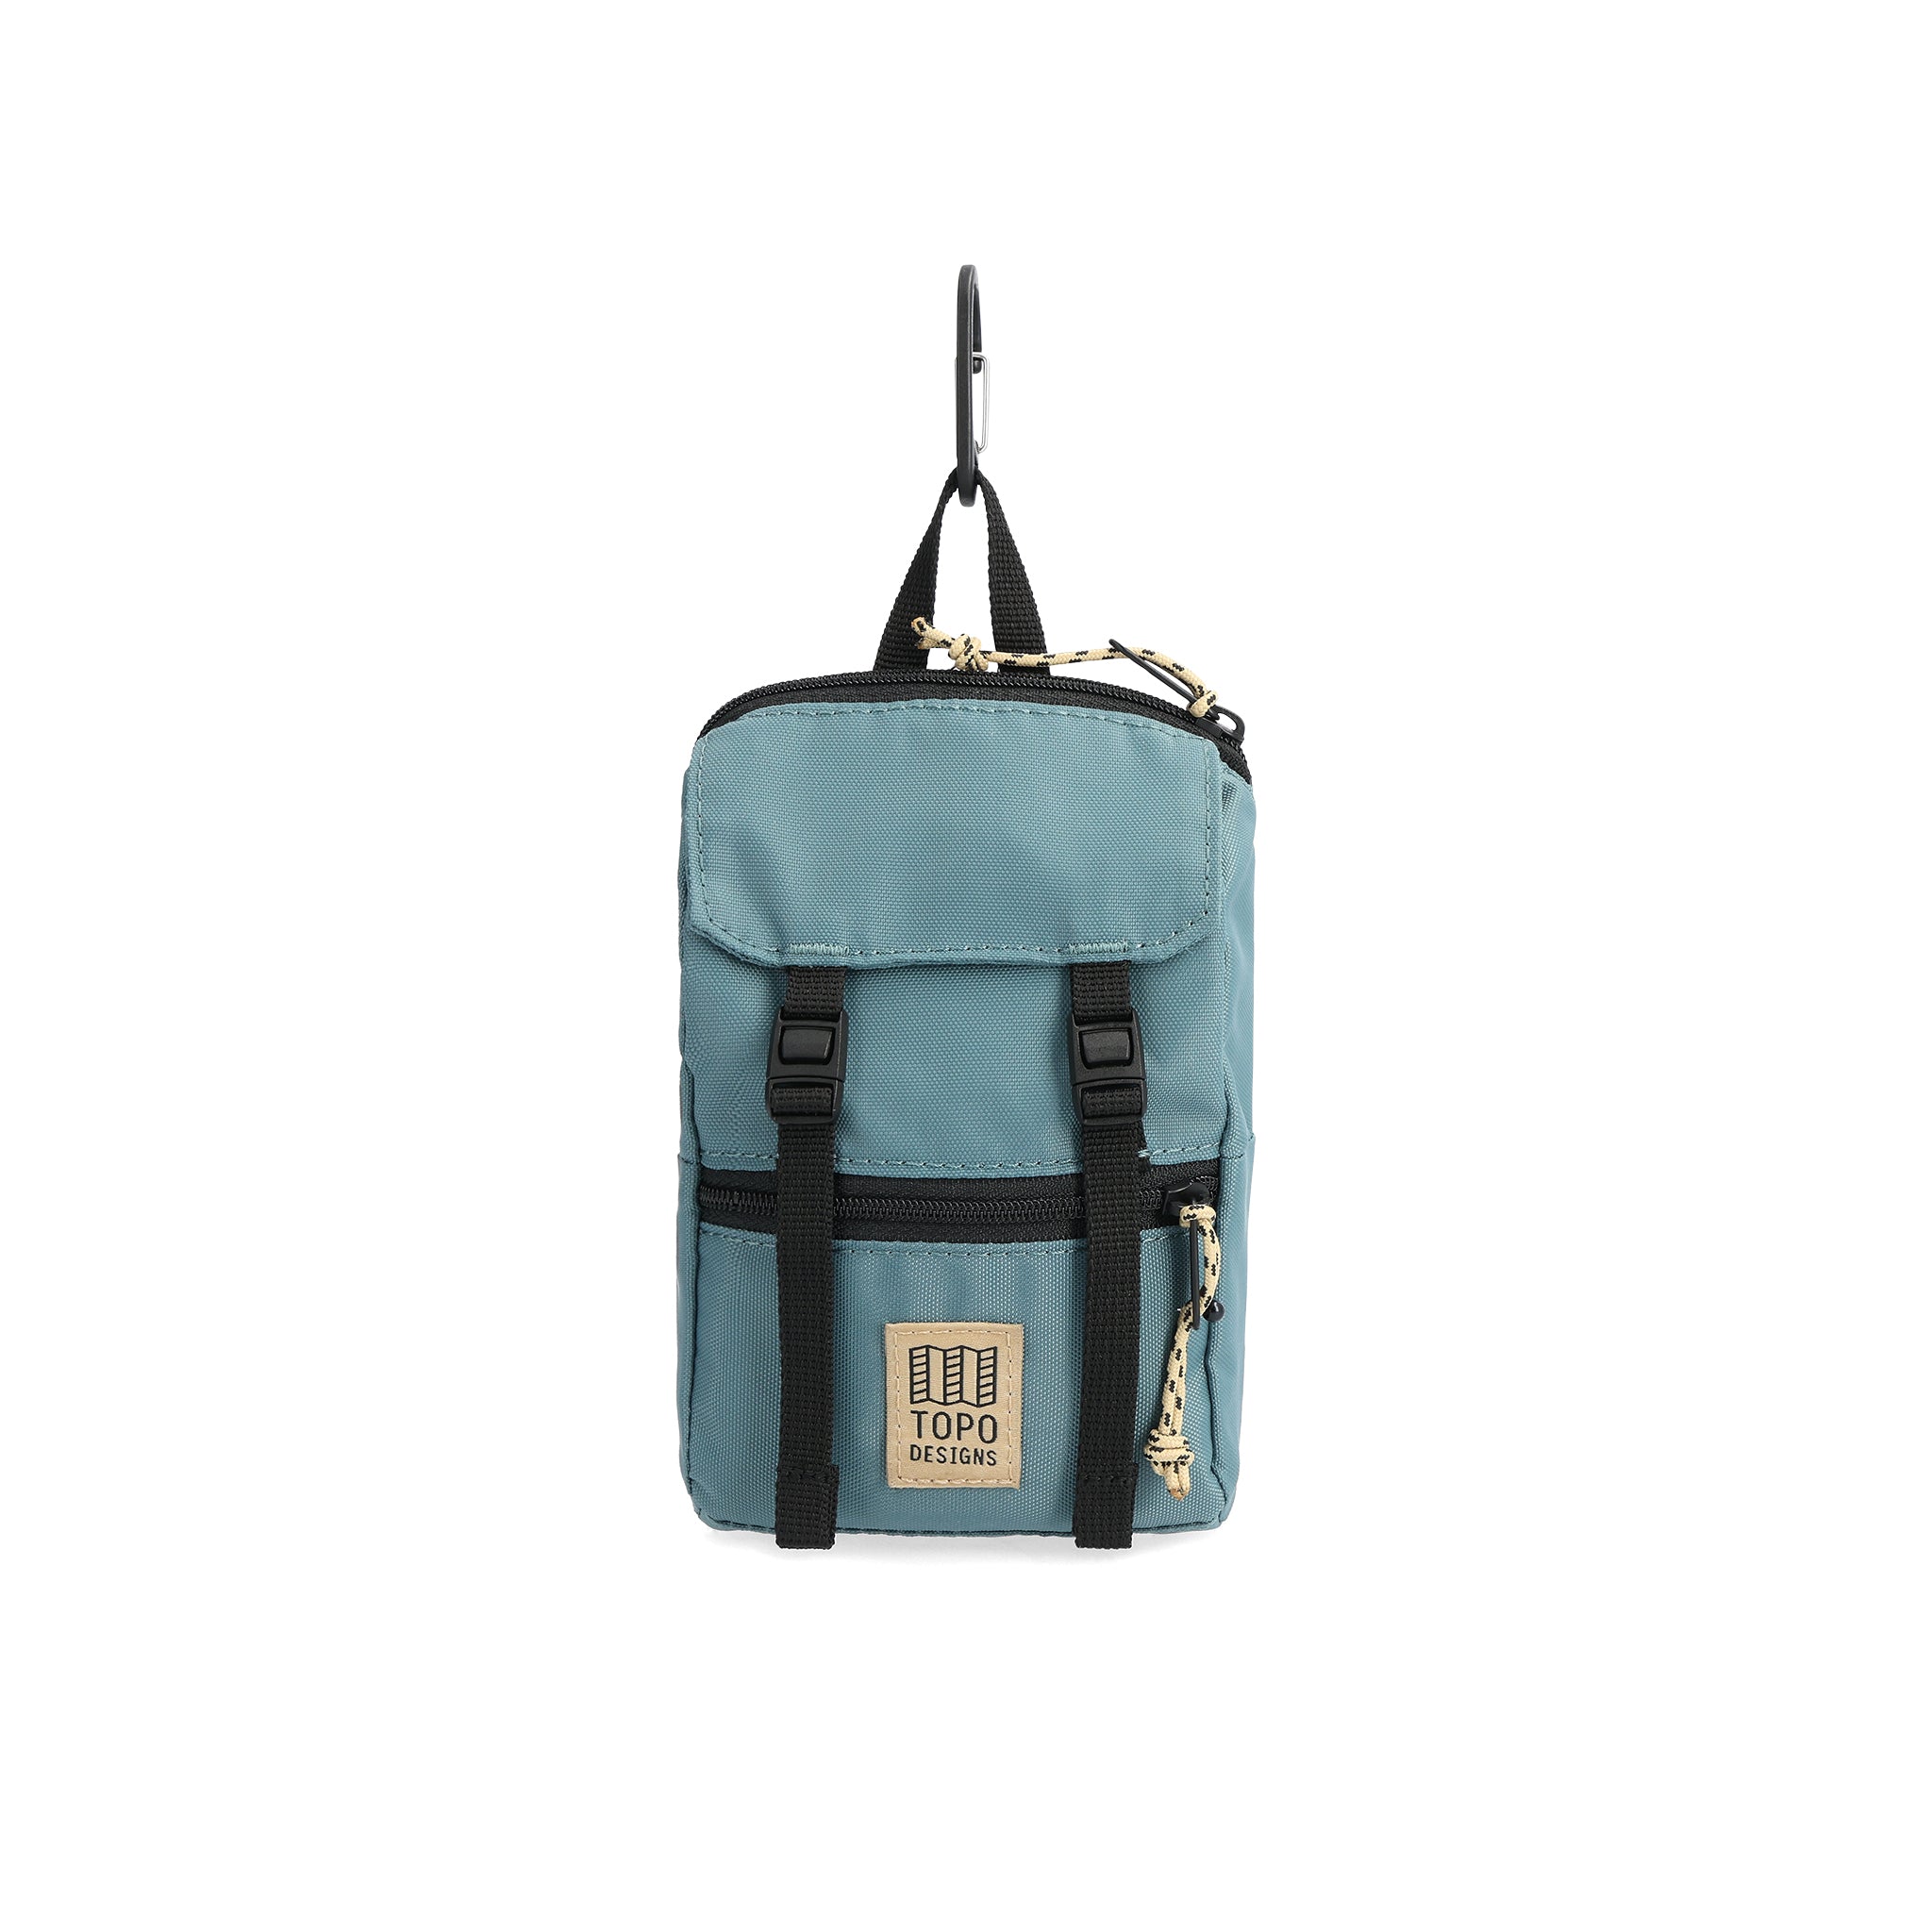 Front View of Topo Designs Rover Pack Micro in "Sea Pine"